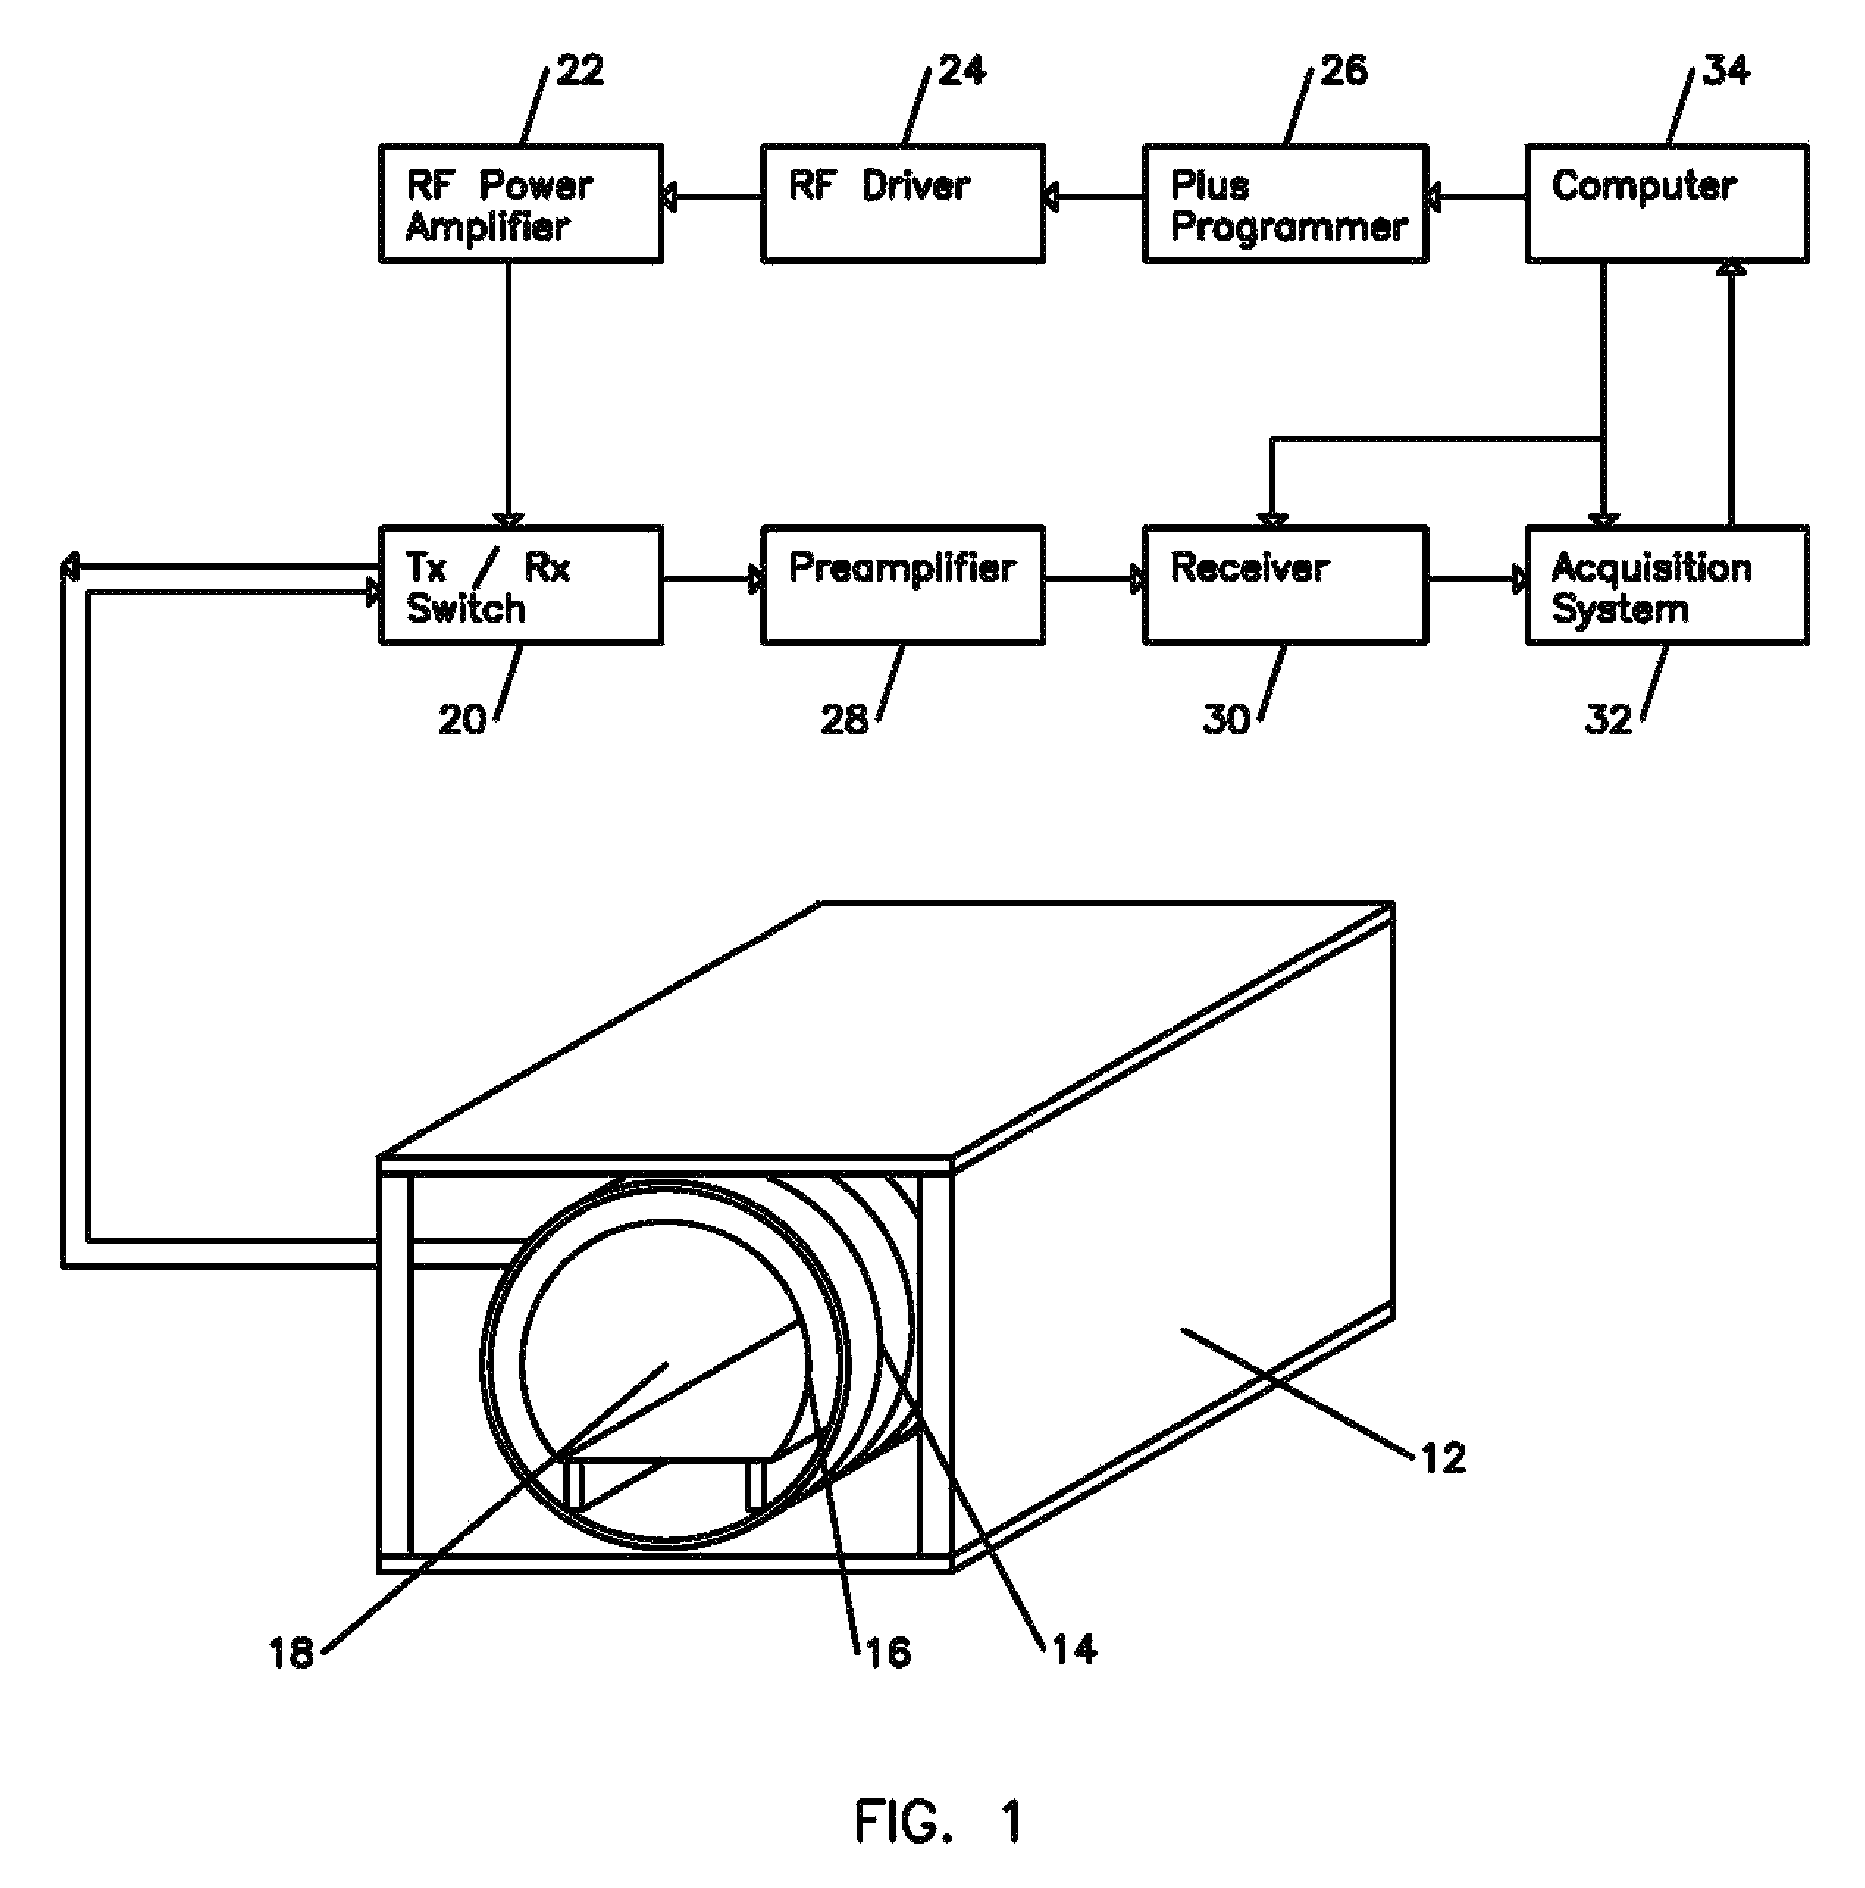 Nuclear magnetic resonance method for body composition analysis